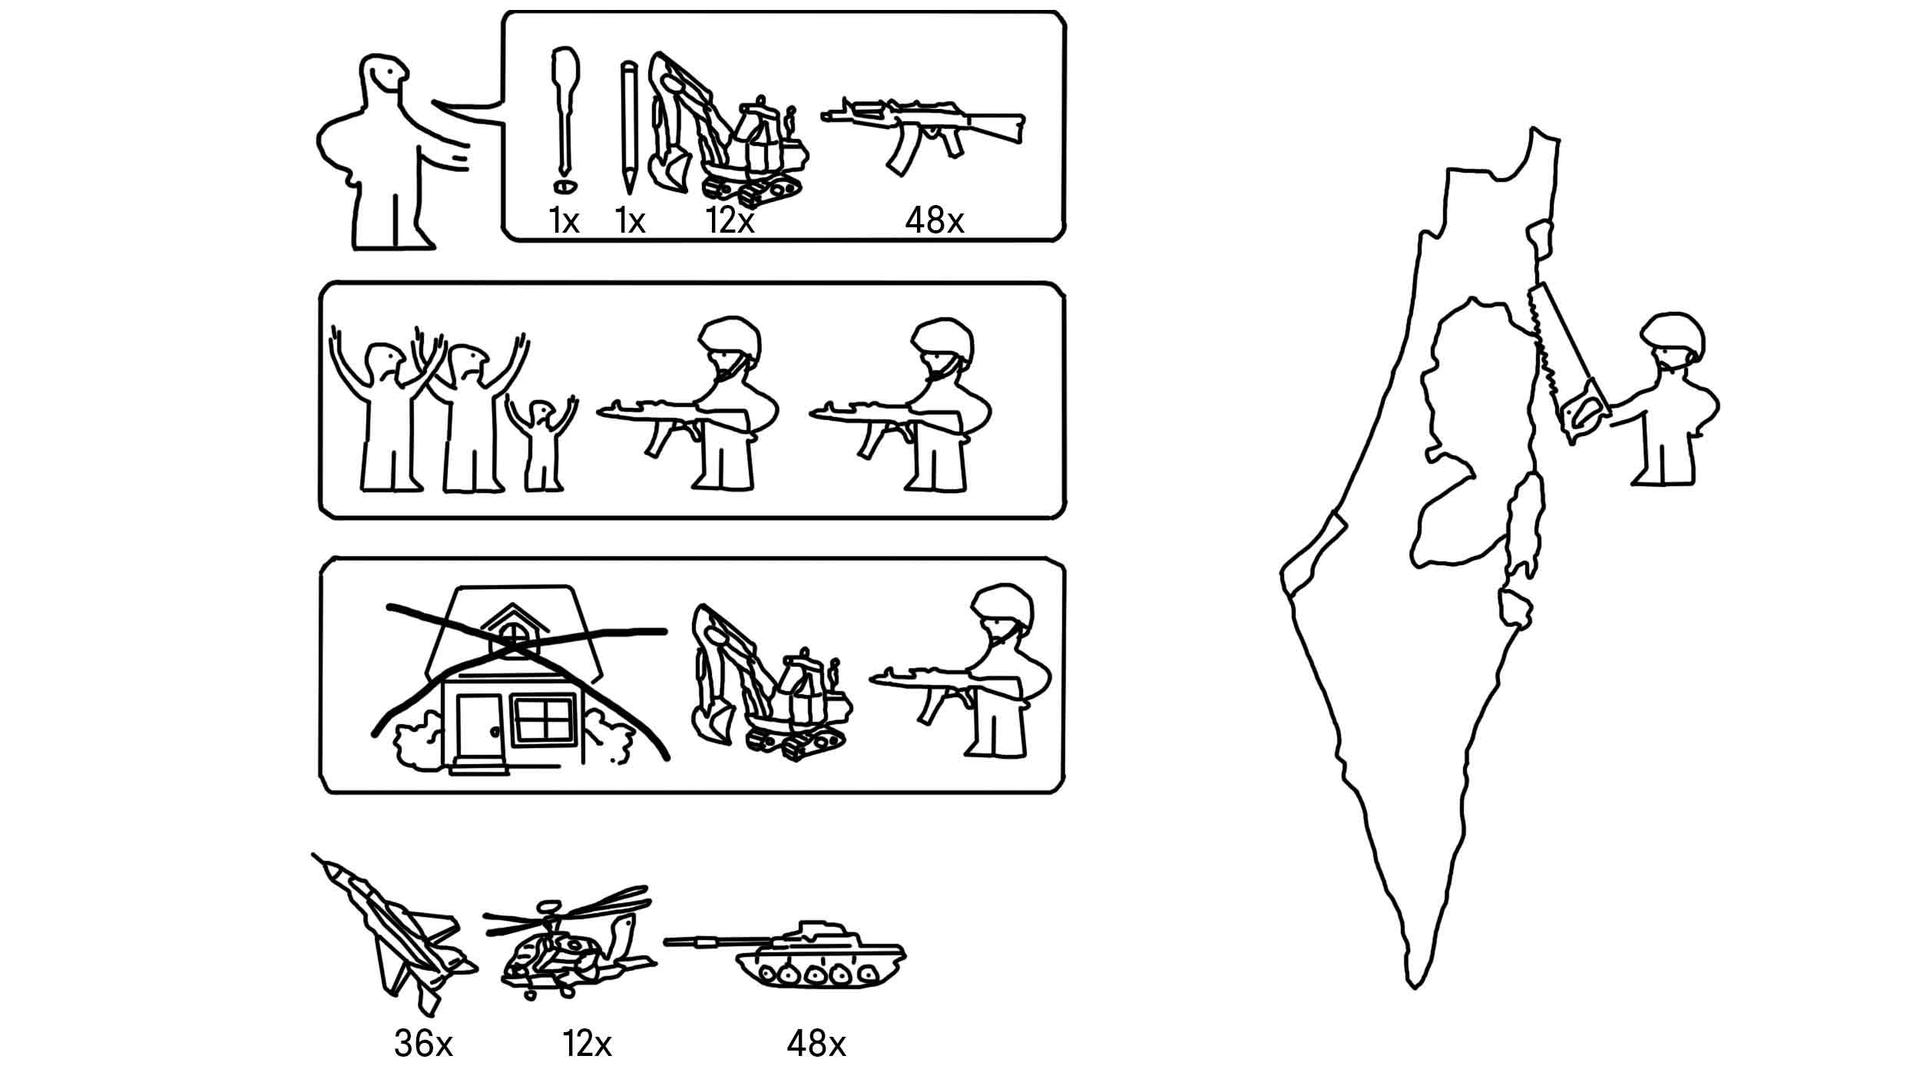 Political cartoon showing the Israeli-Palestinian conflict in the style of Ikea instructions.